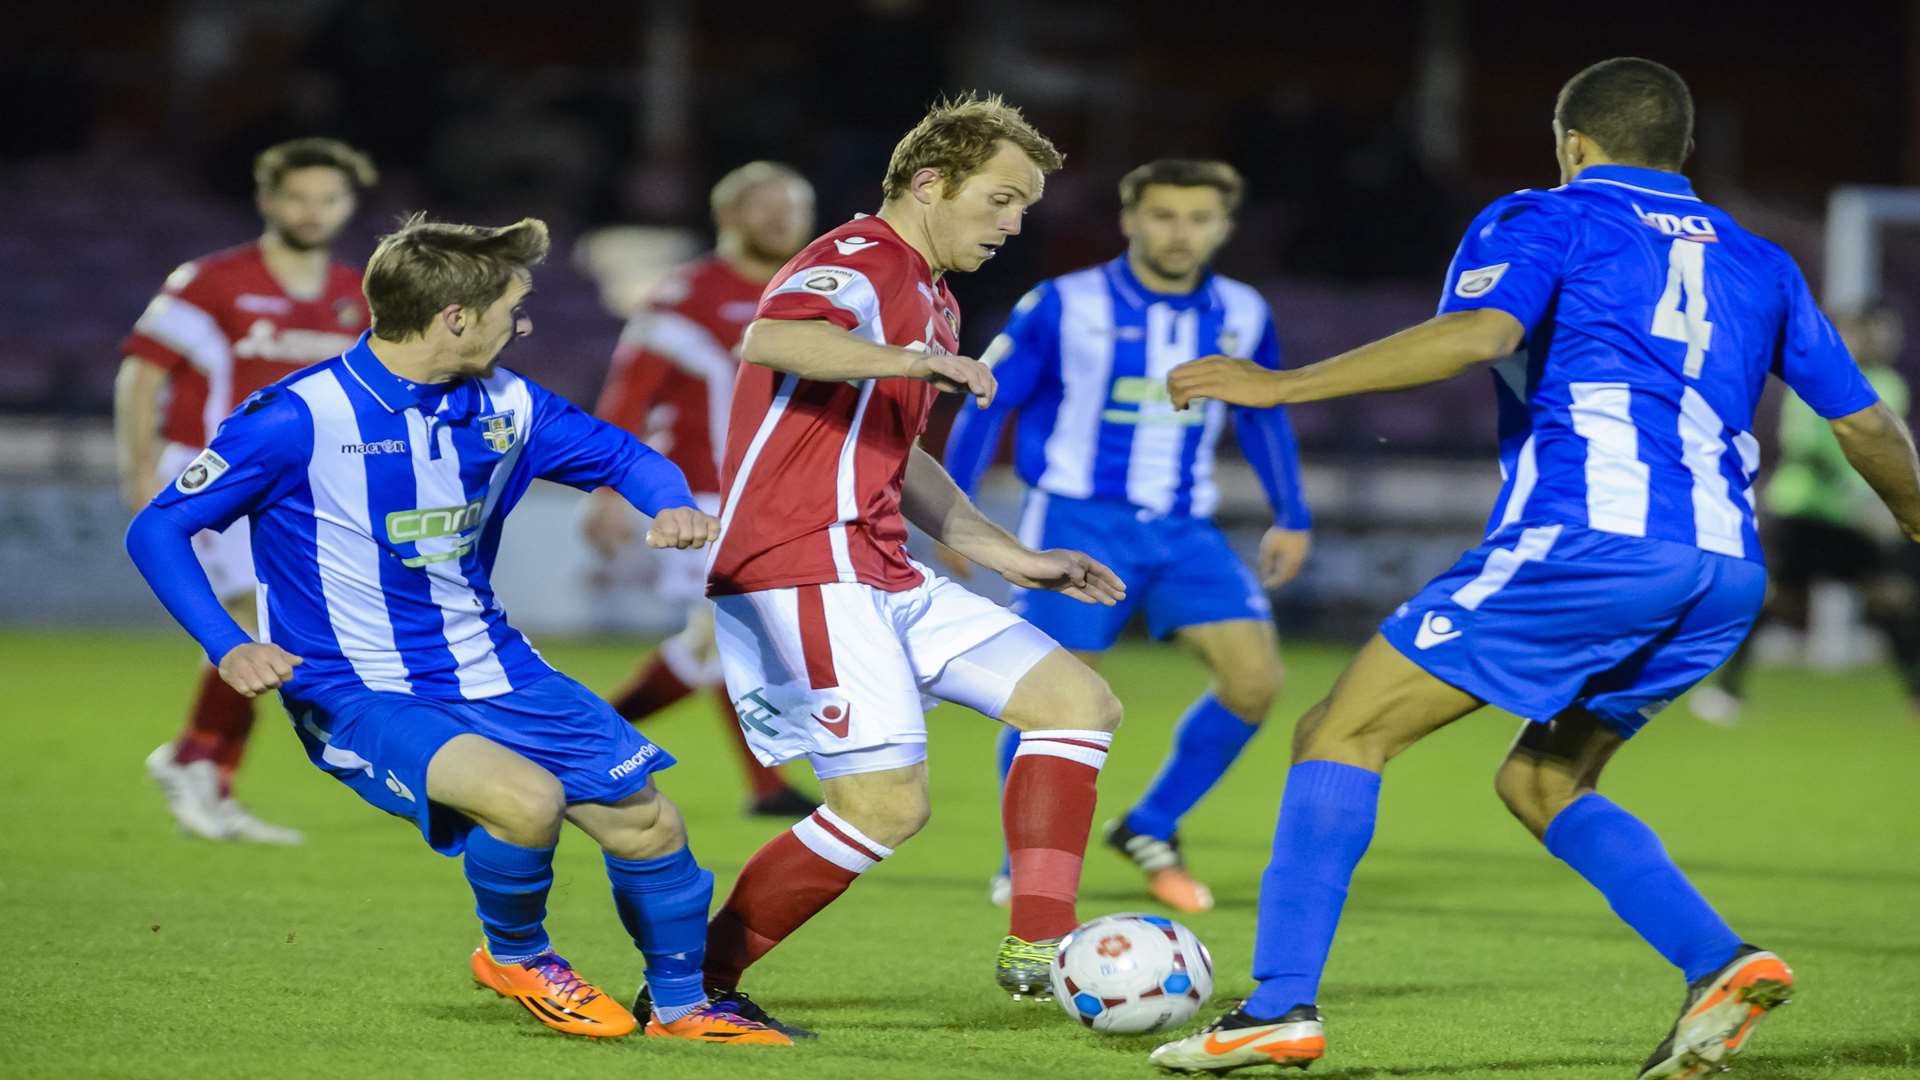 Stuart Lewis on the ball for Ebbsfleet against Bishop's Stortford Picture: Andy Payton